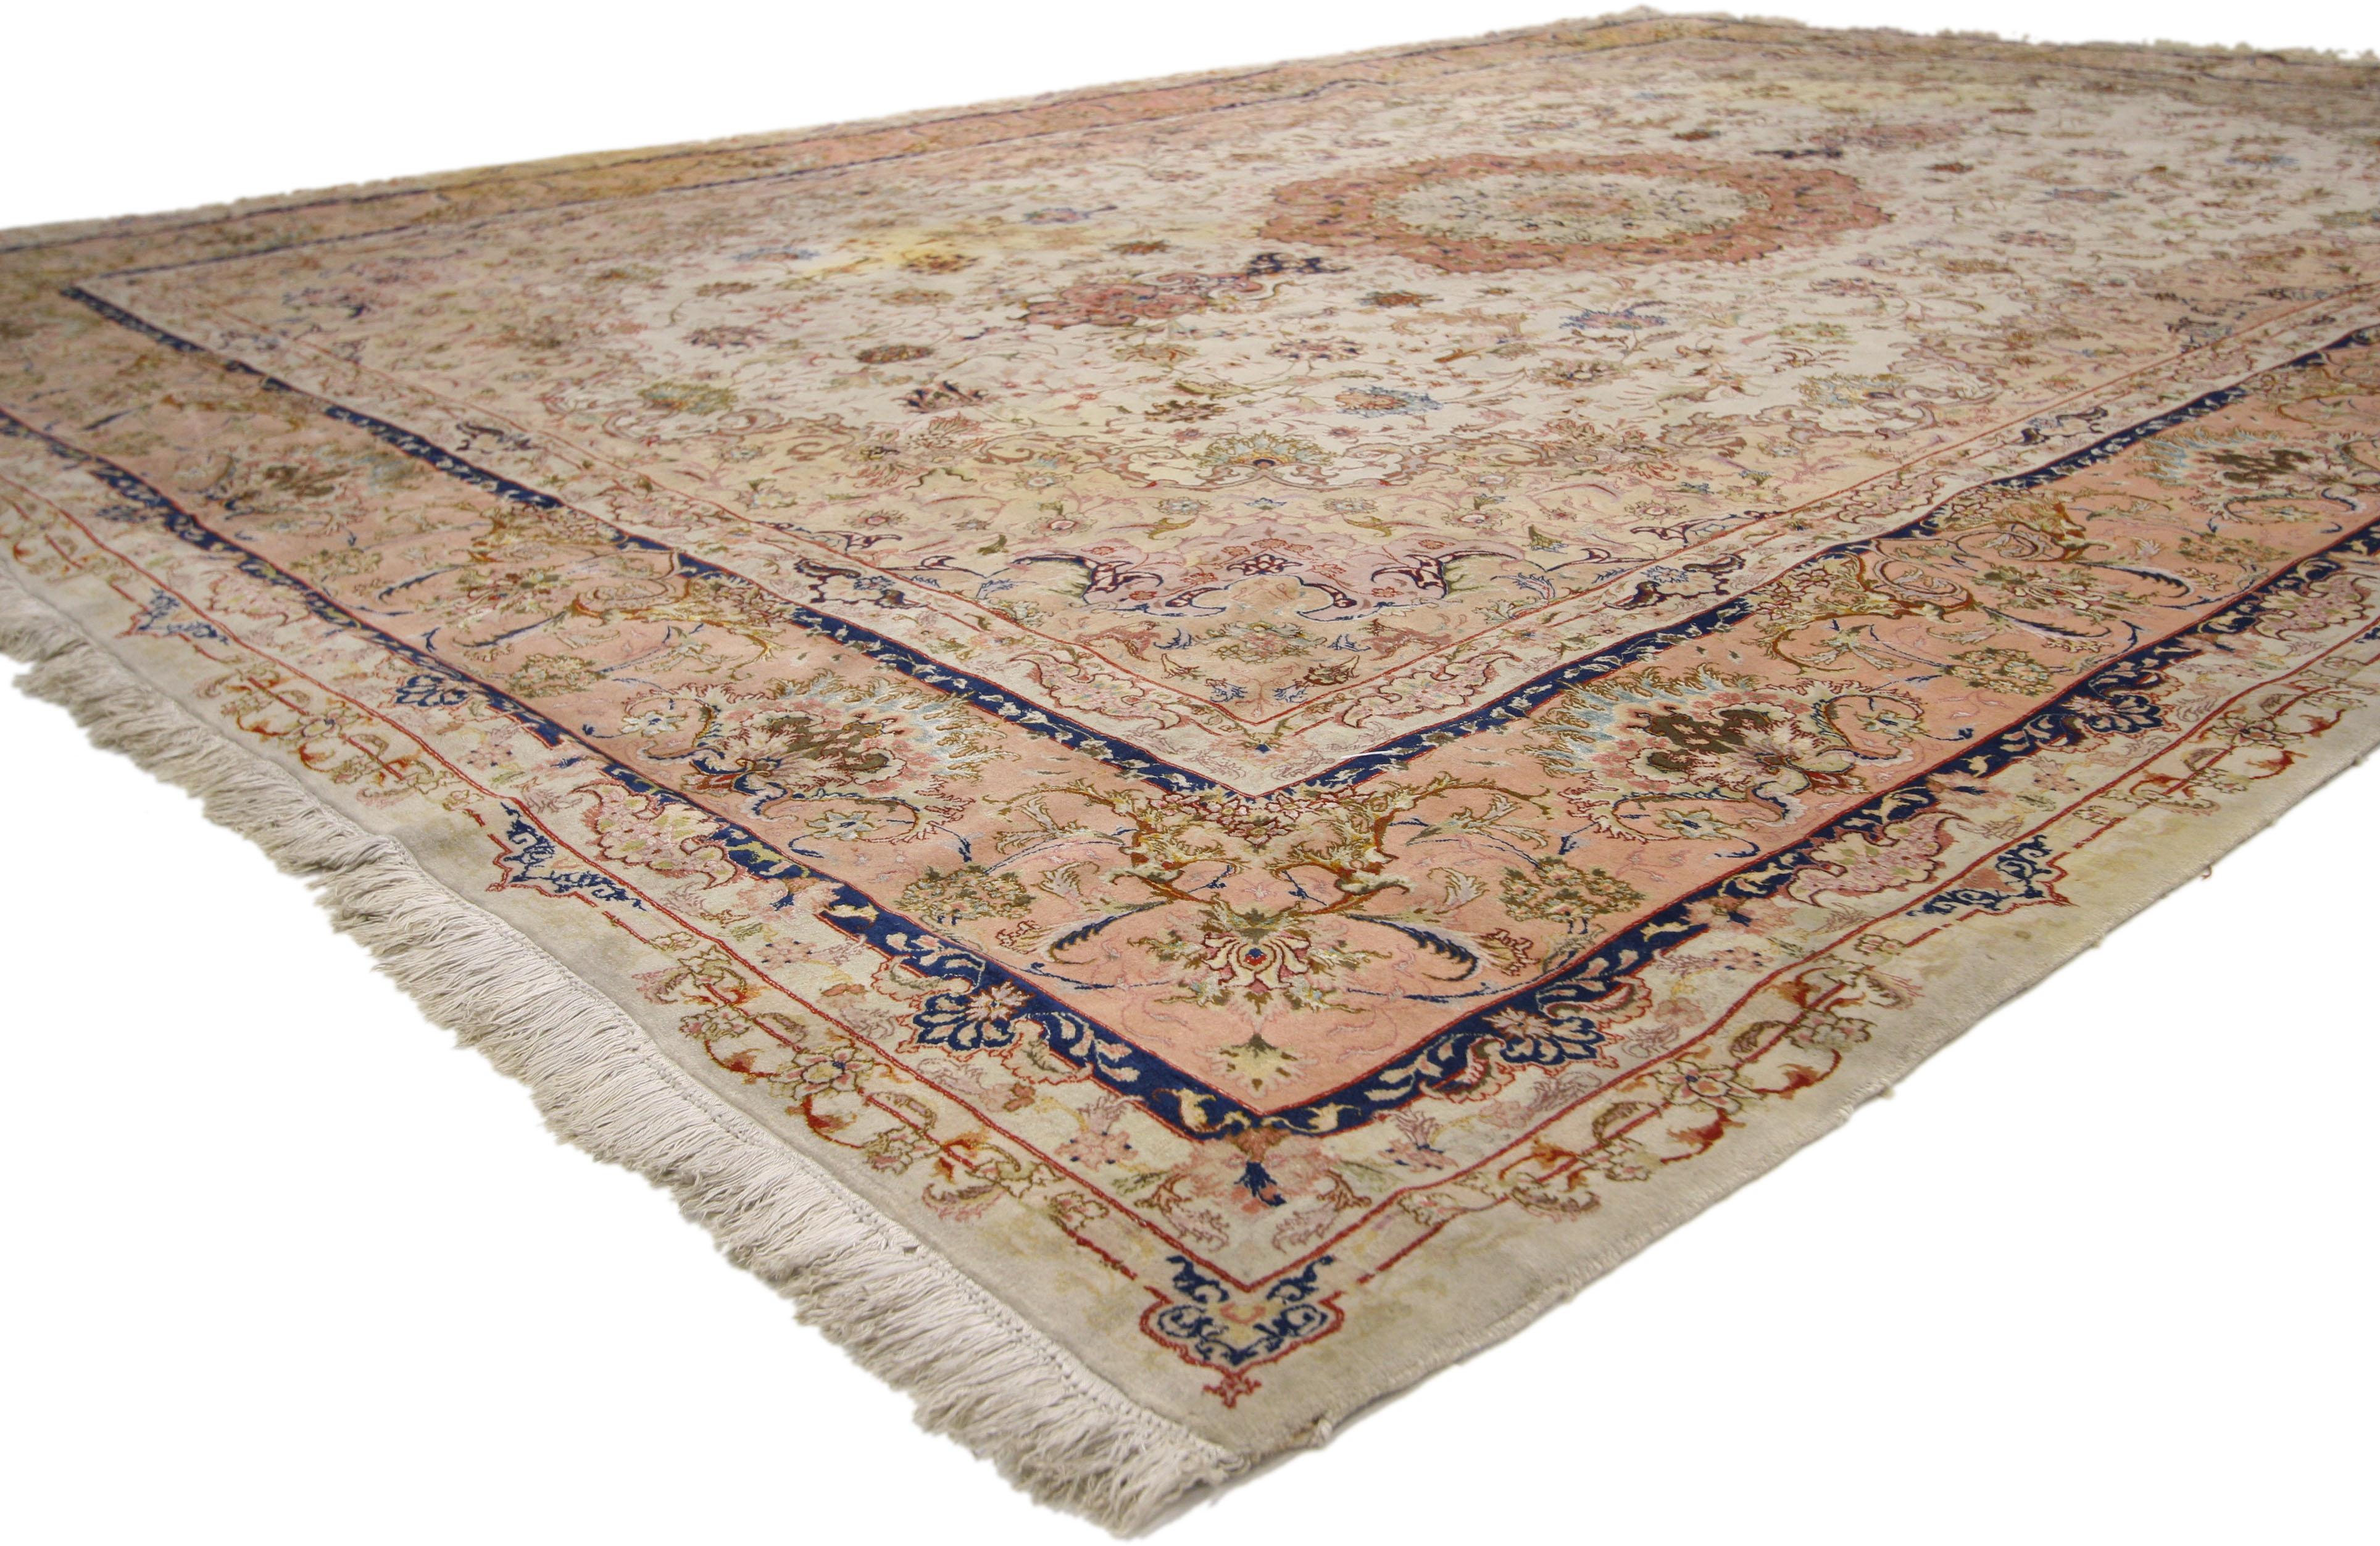 77182 Wool and Silk Vintage Persian Tabriz Rug, 09'09 x 13'05. With a harmonious blend of French Rococo elegance and Persian craftsmanship, this wool and silk Tabriz rug showcases a delicate interplay of light and airy colors. At its center lies a